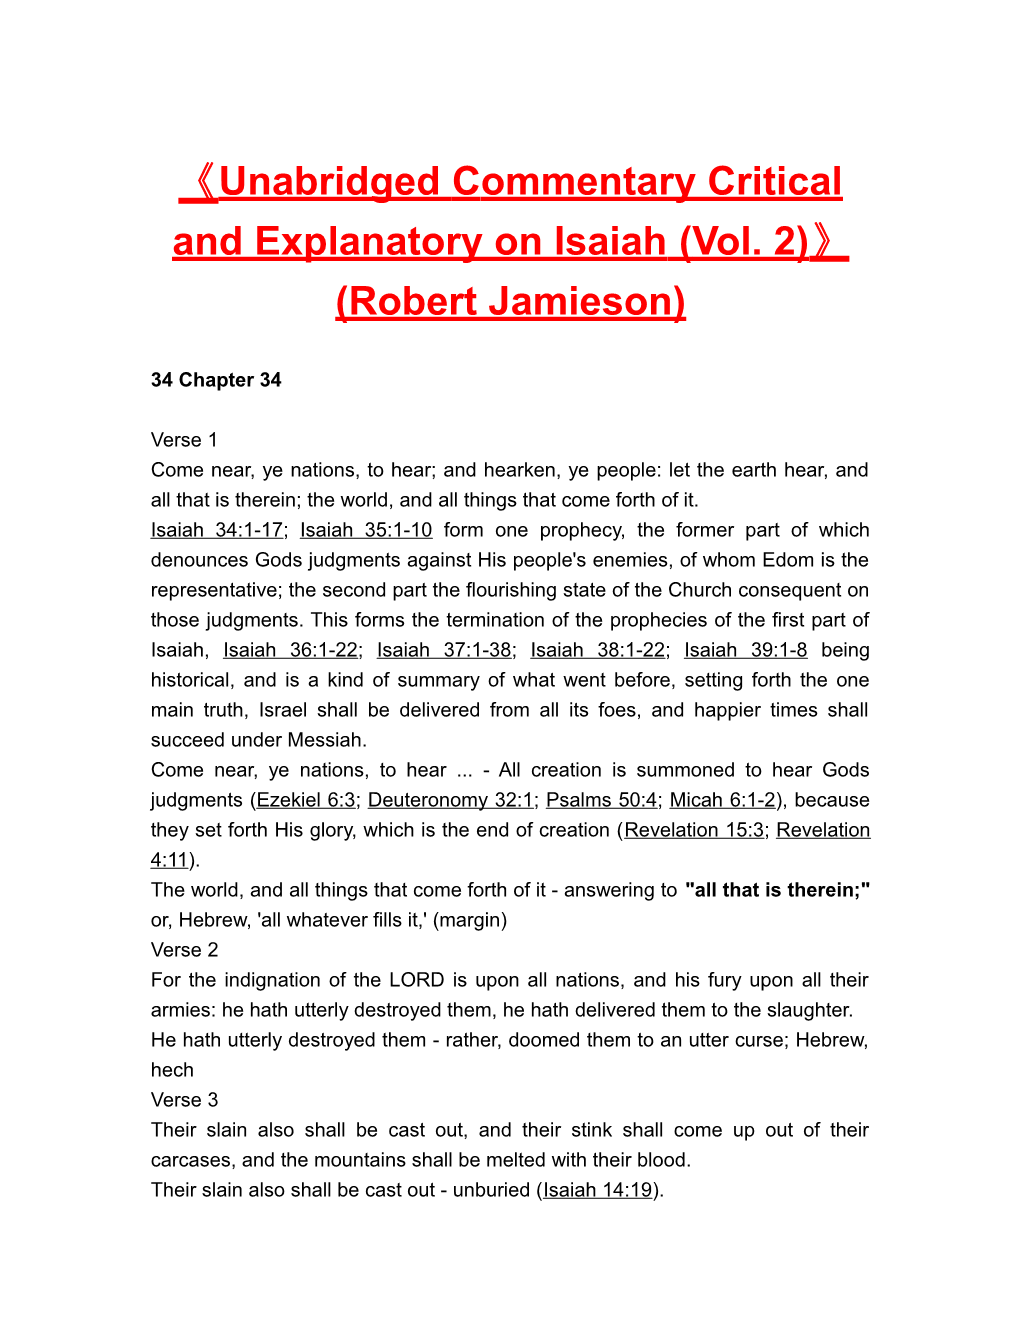 Unabridged Commentary Critical and Explanatory on Isaiah (Vol. 2) (Robert Jamieson)